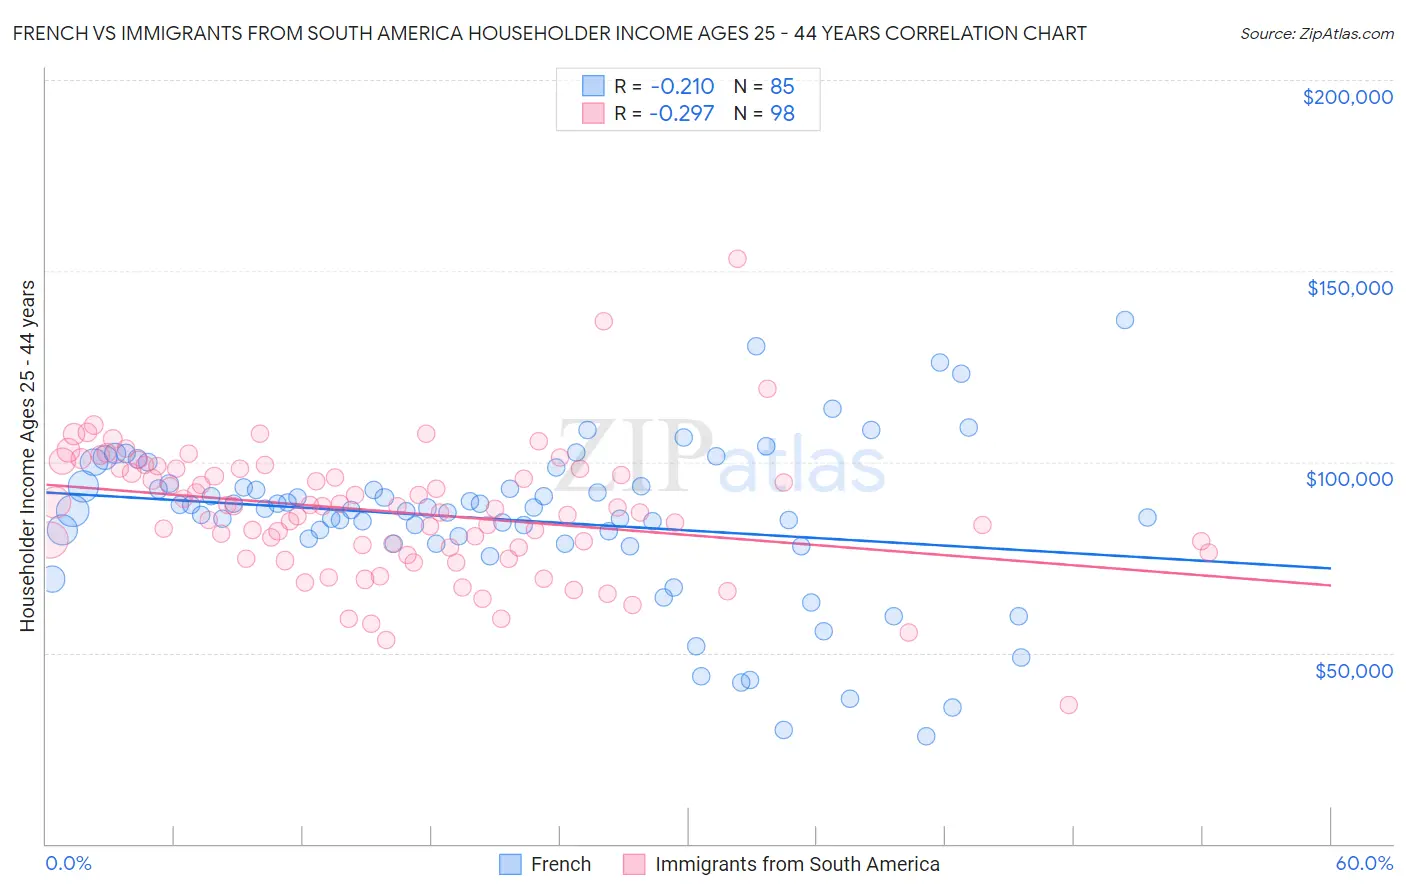 French vs Immigrants from South America Householder Income Ages 25 - 44 years